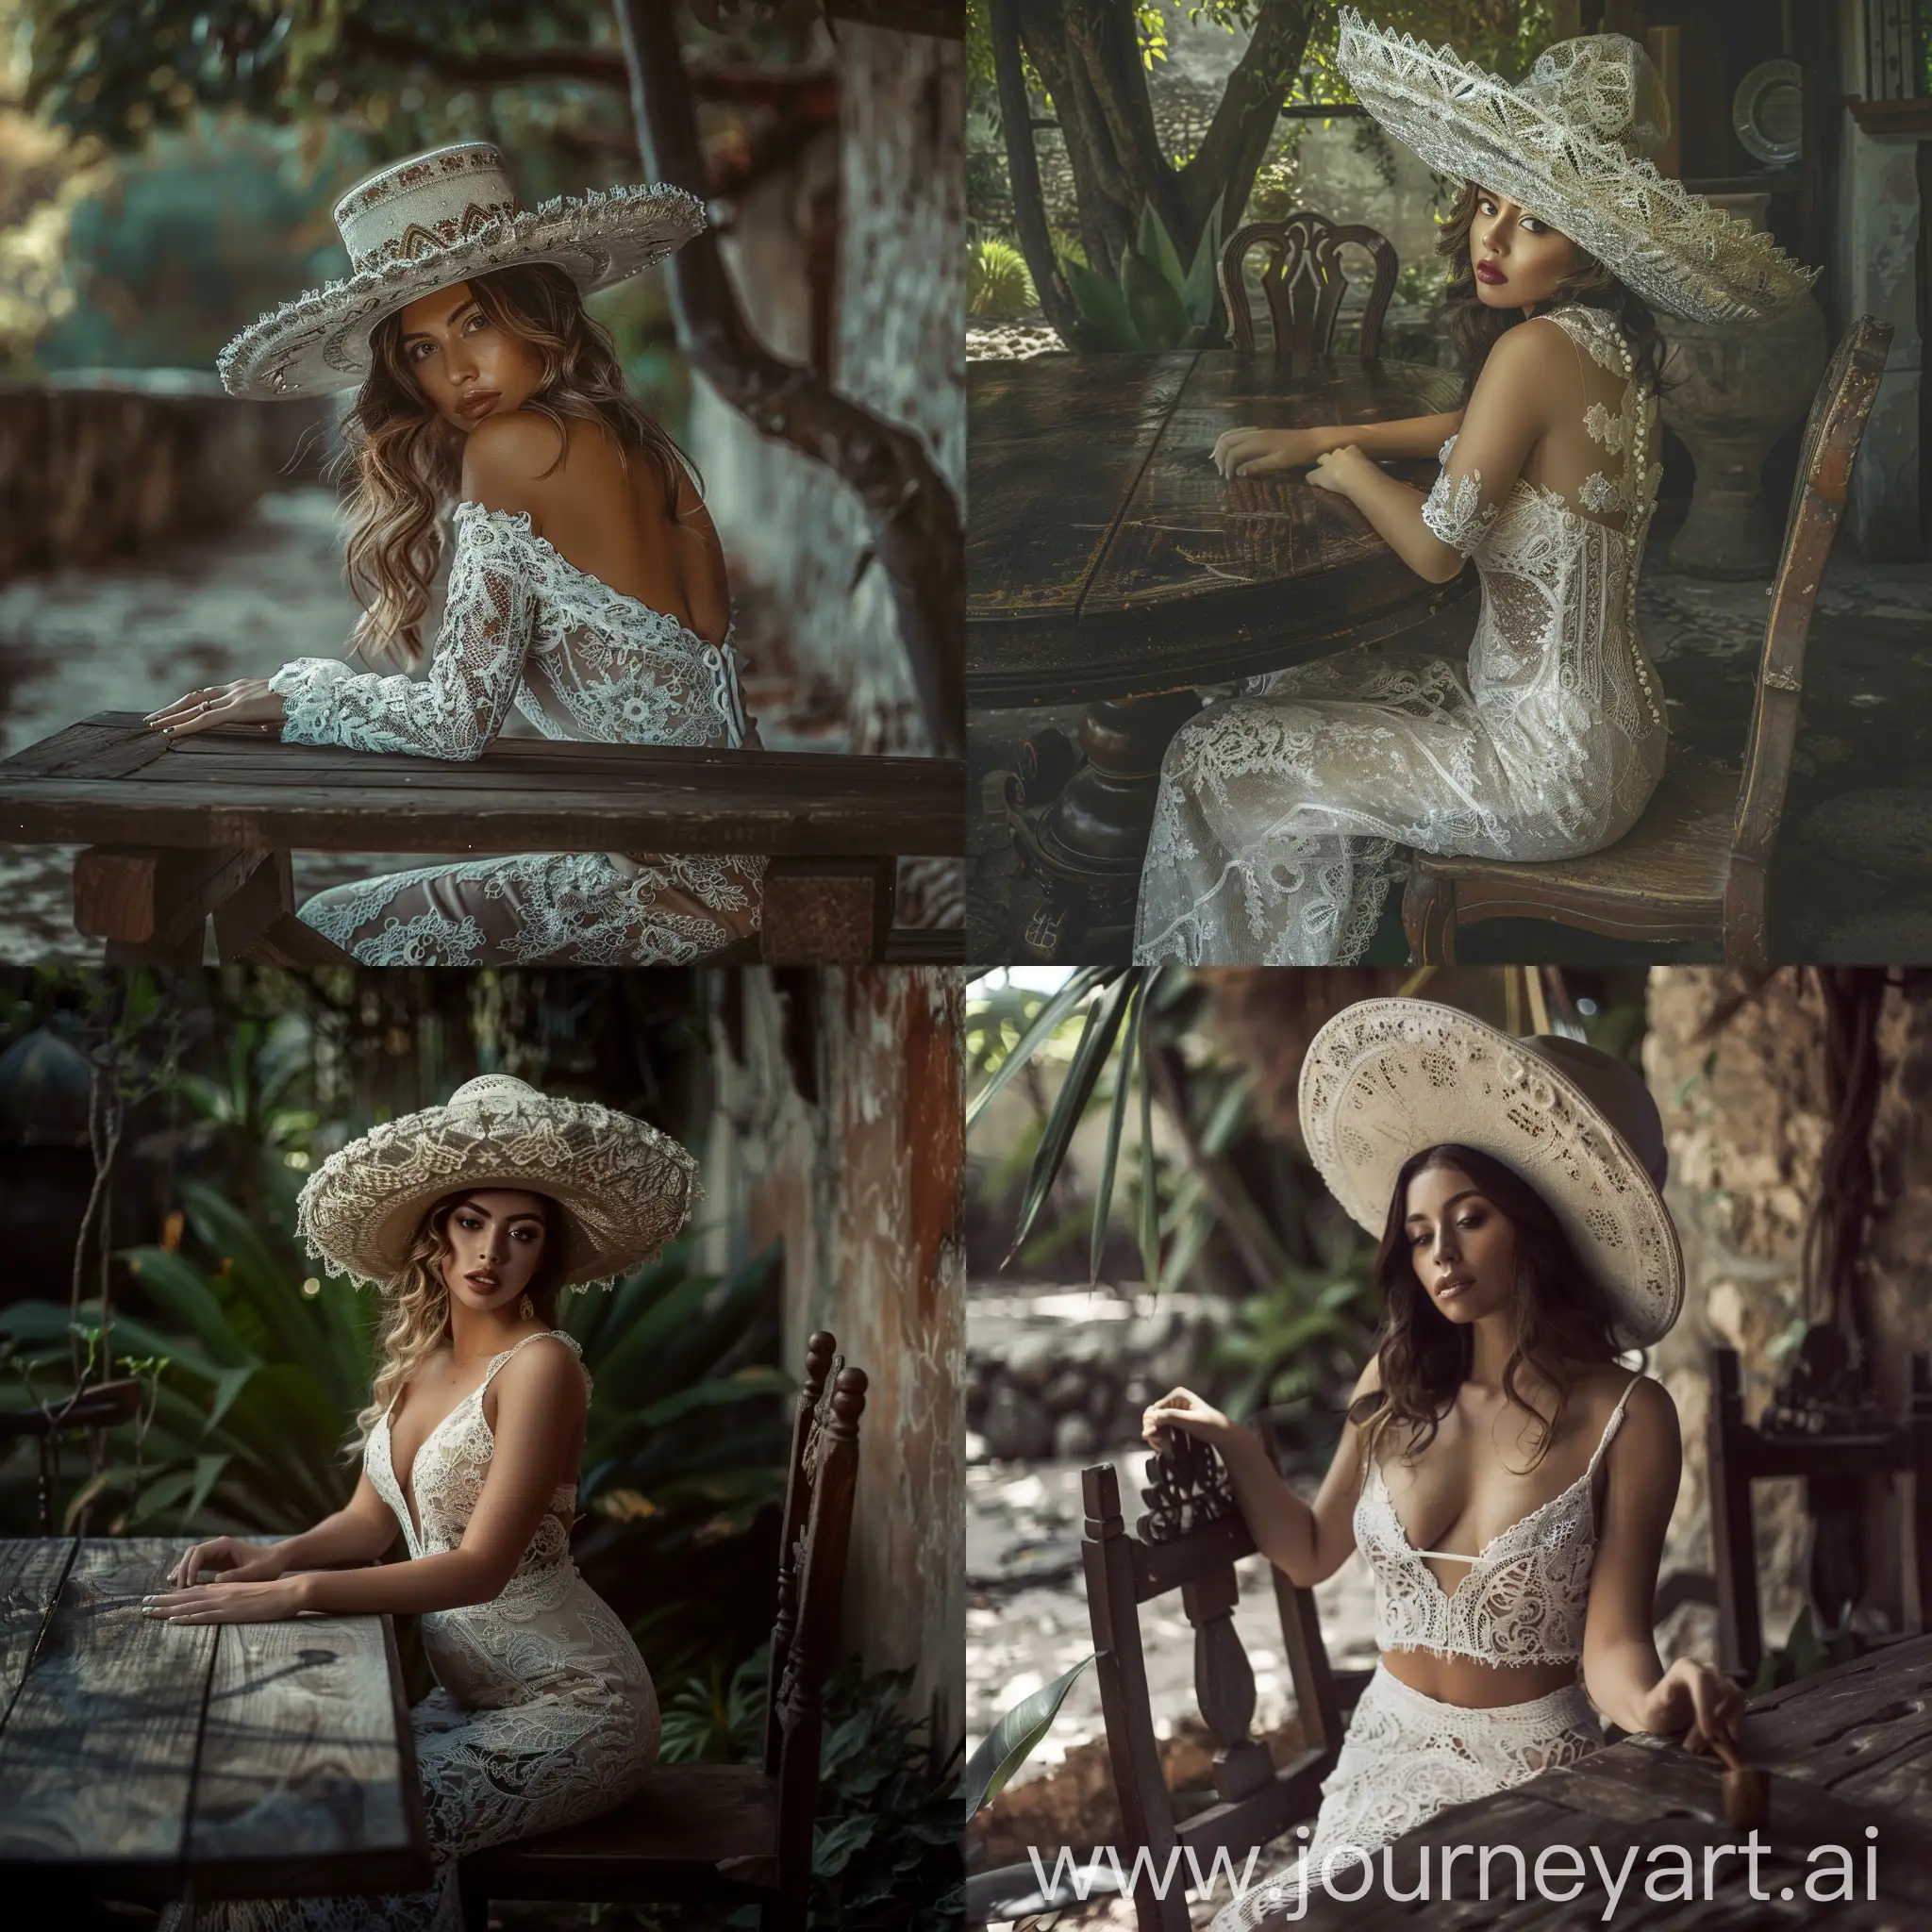 hour glass physique, wearing a laced white dress, wearing a women's elegant sombrero hat, in an old colonial garden sitting at a dark wood table, the model dose not exist in real life